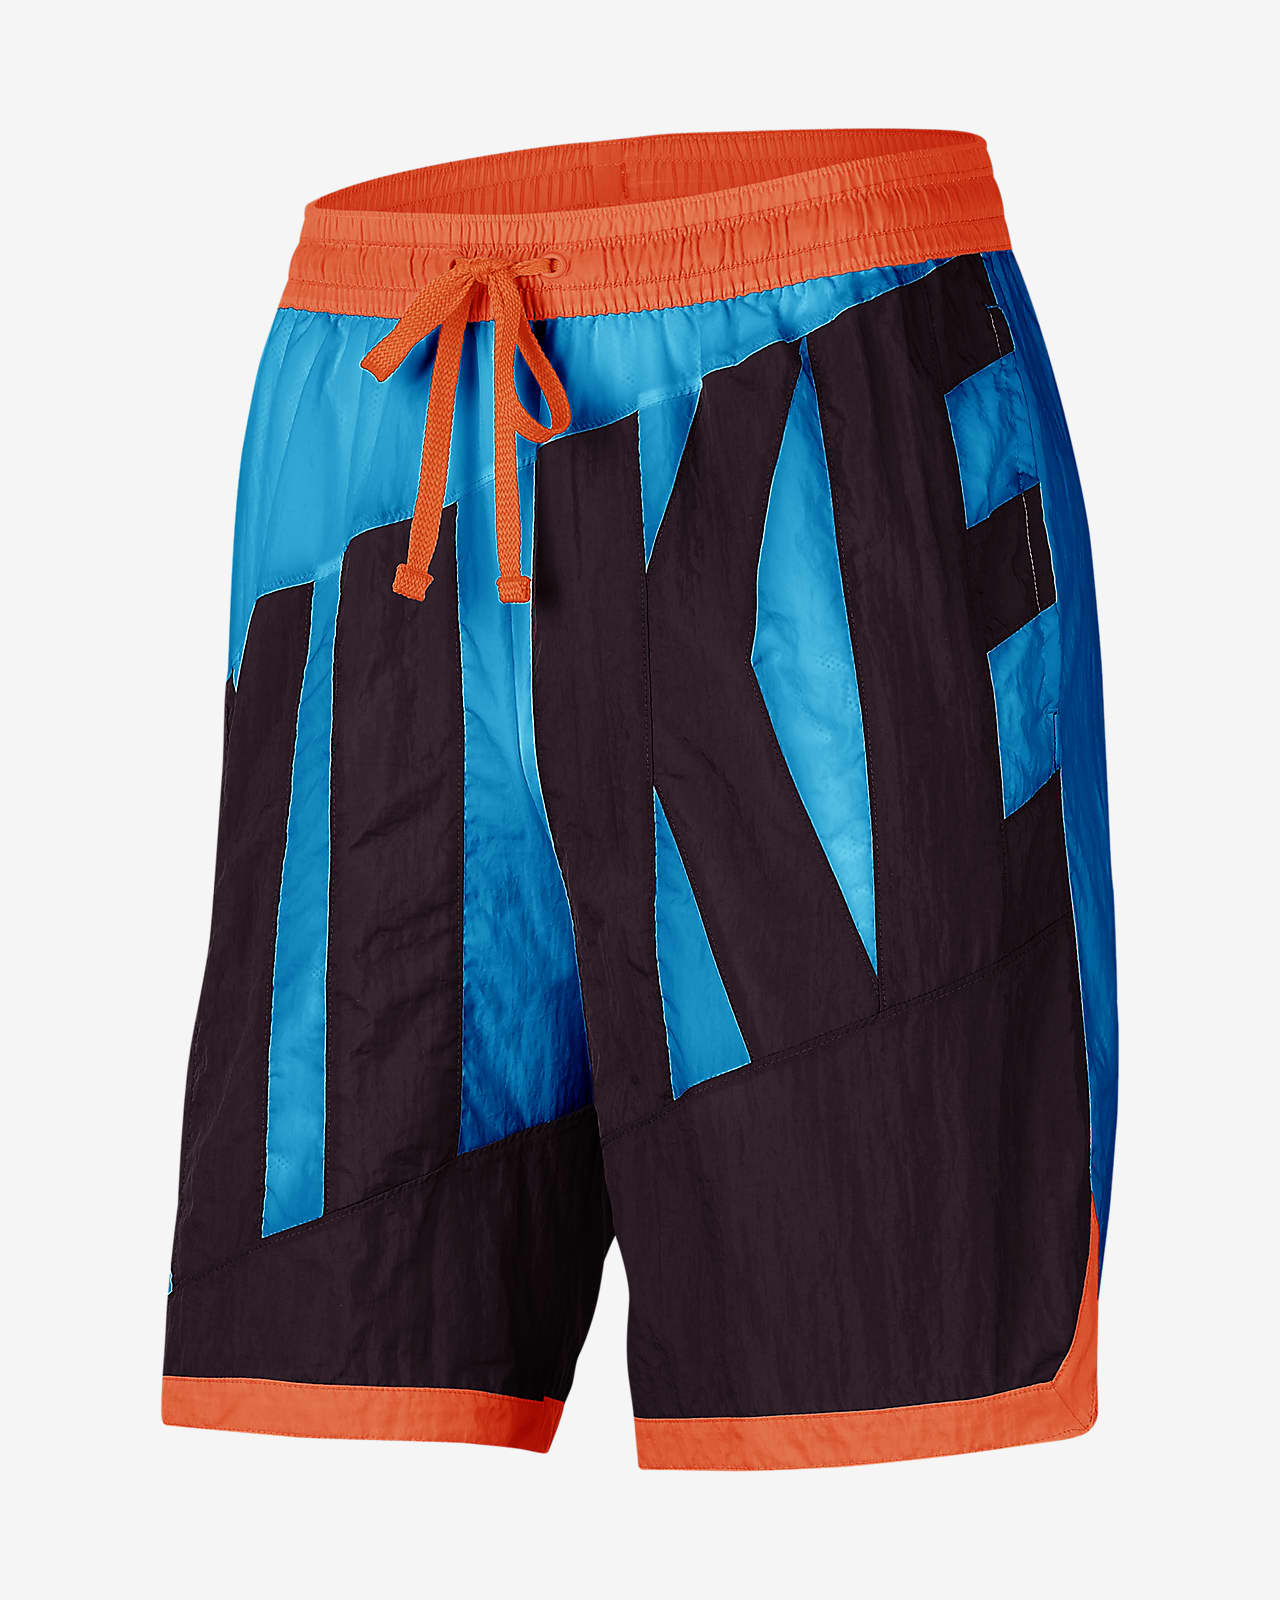 nike shorts with nike across the front